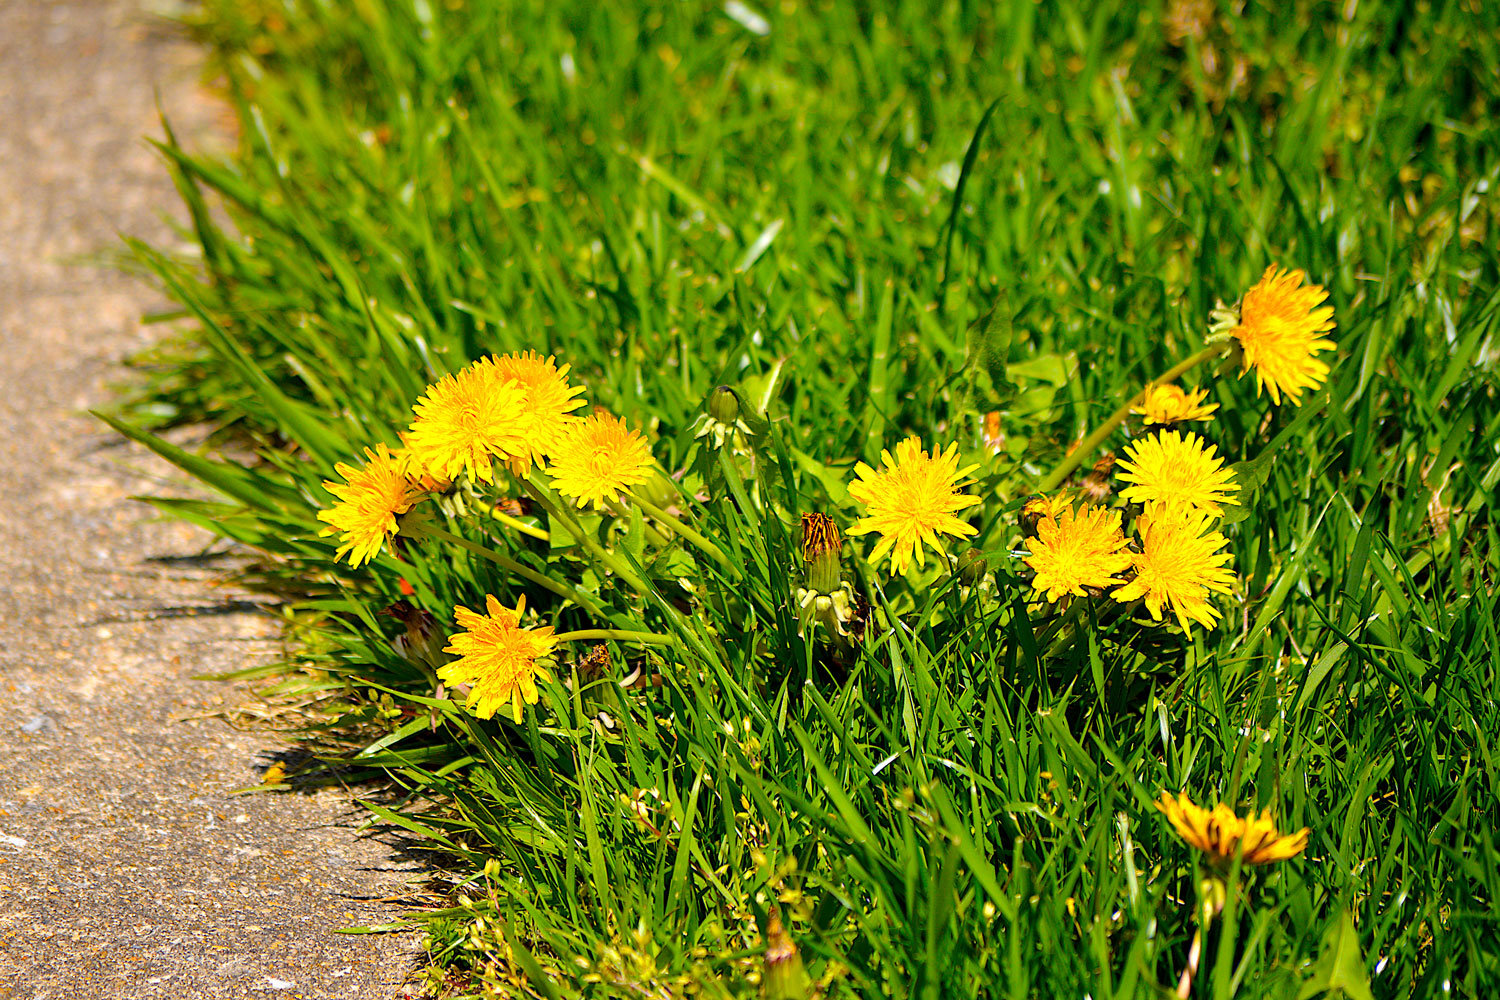 How to get rid of annoying lawn weeds with yellow flowers